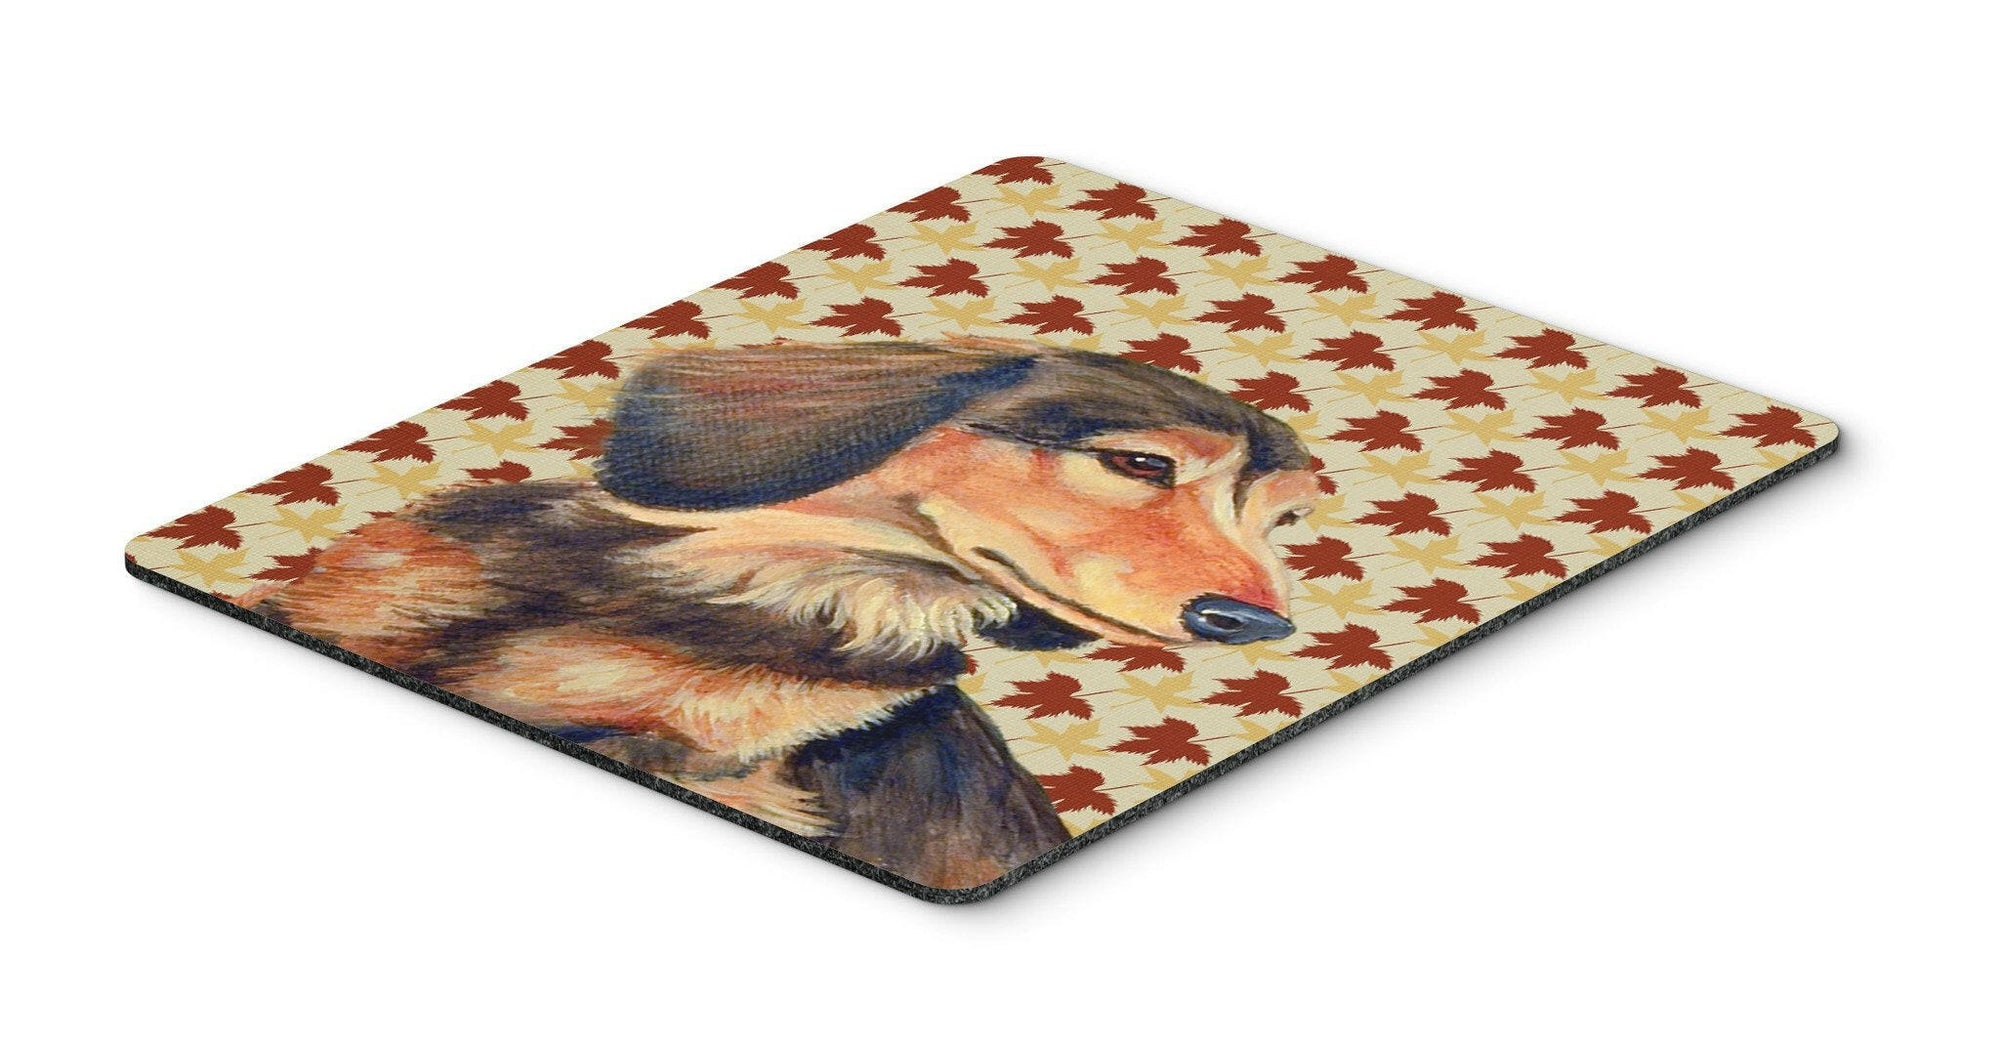 Dachshund Fall Leaves Portrait Mouse Pad, Hot Pad or Trivet by Caroline's Treasures